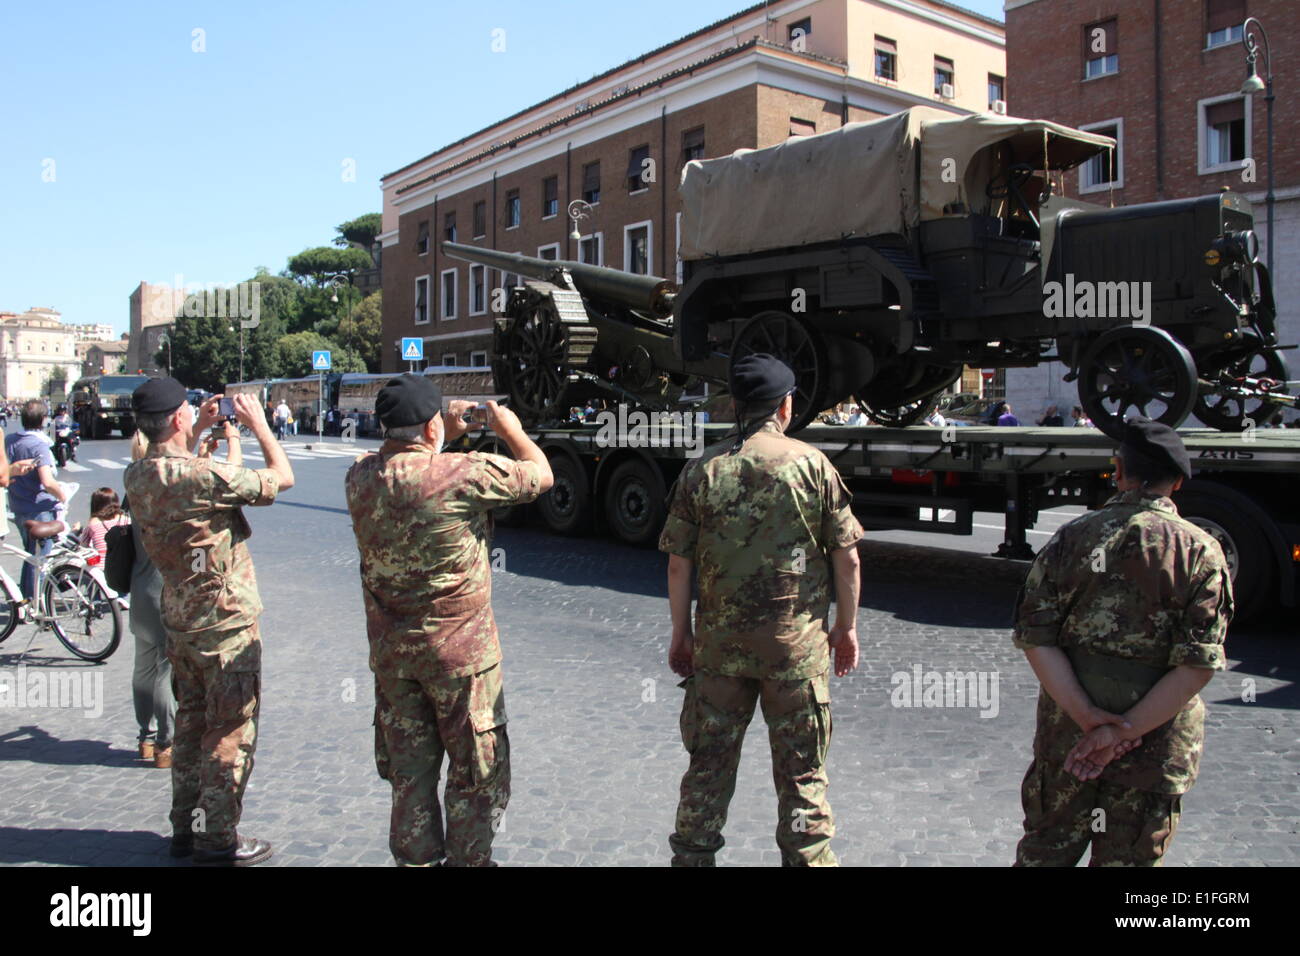 Rome, Italy 2nd June 2014 Military personnel marching at the 2nd June Republic Day parade in rome italy © Gari Wyn Williams/Alam Stock Photo